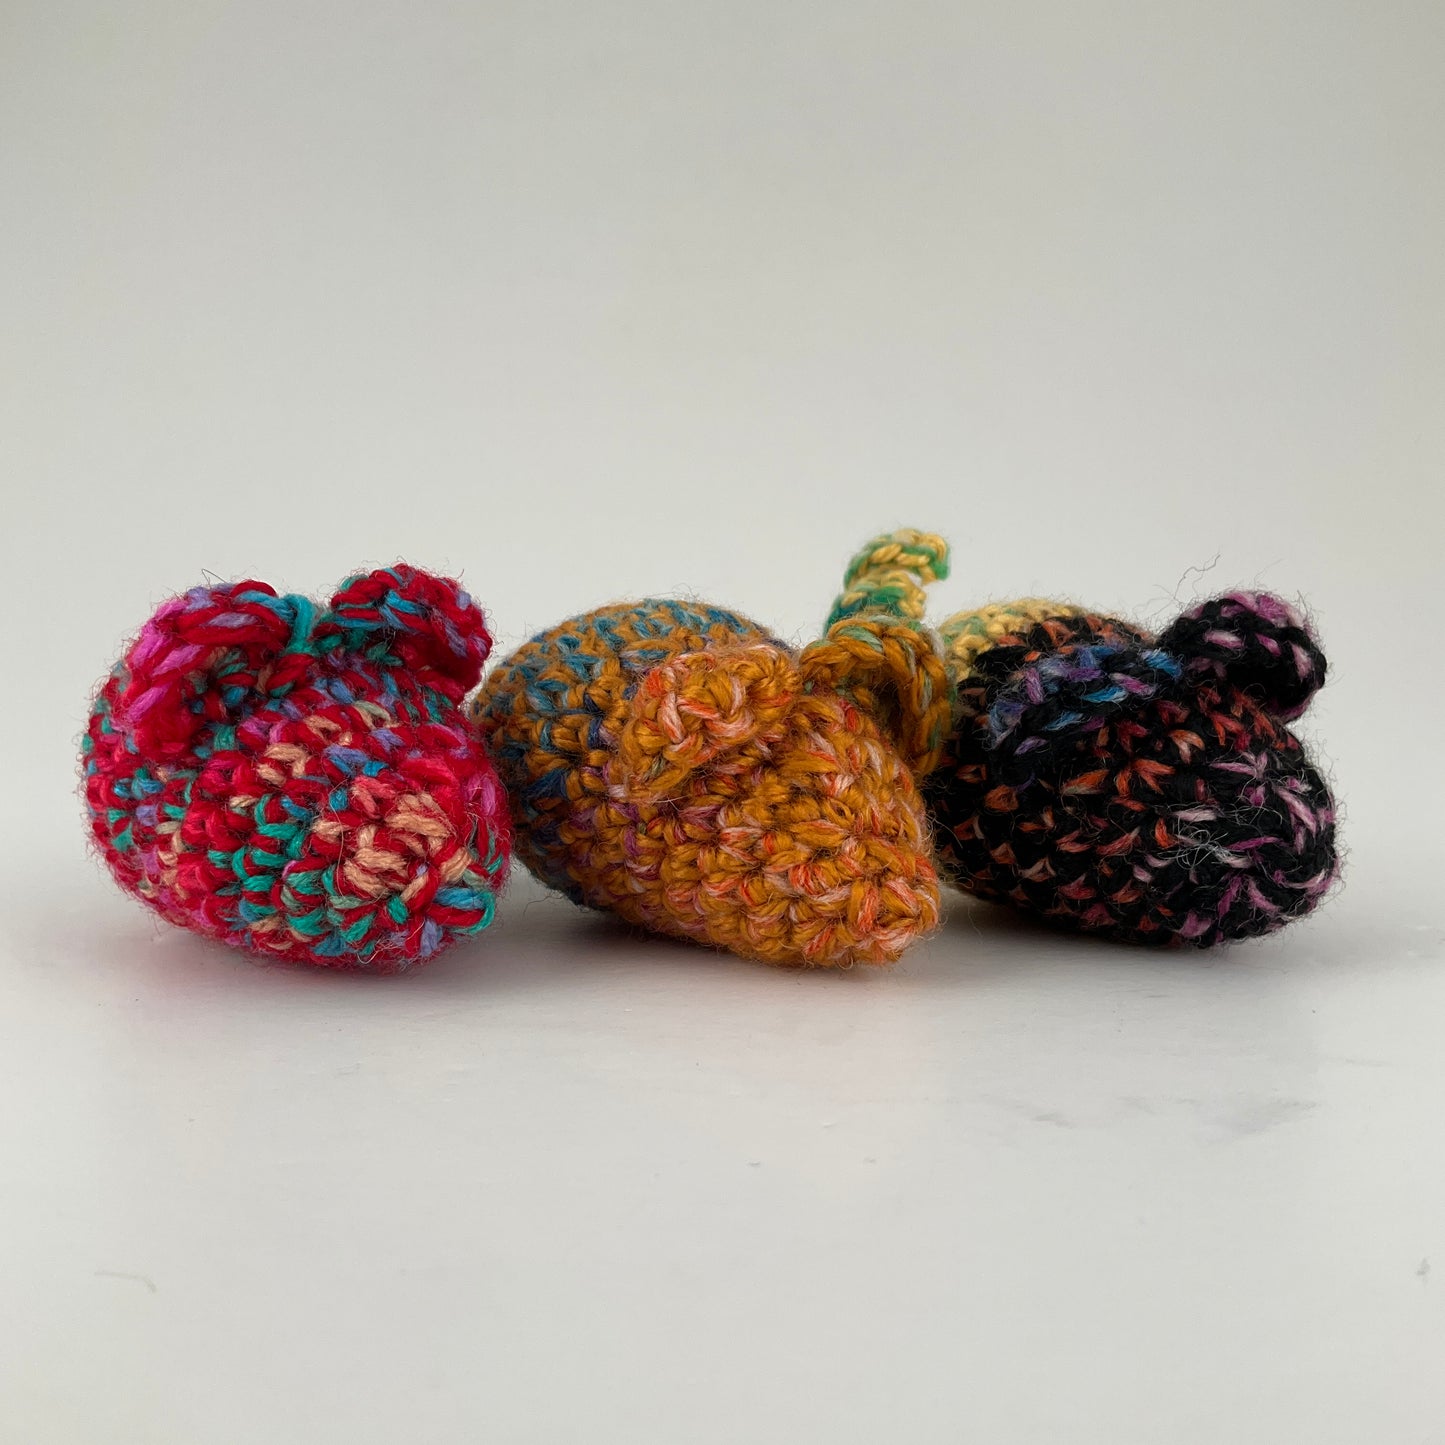 Handknitted Toys - Mice 1